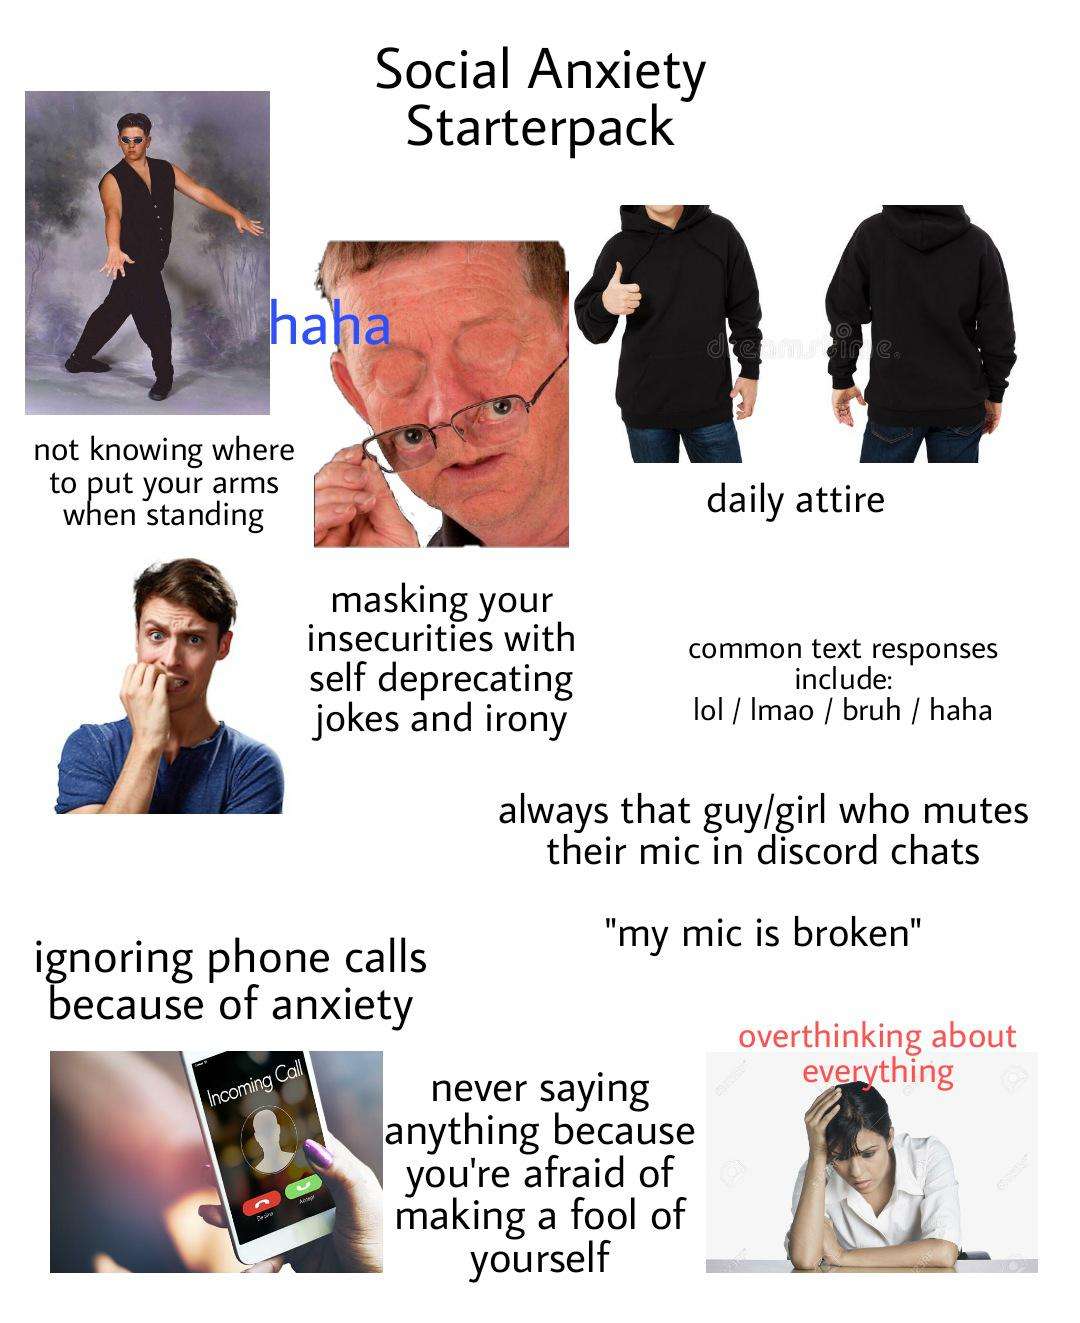 image showing Social Anxiety Starterpack